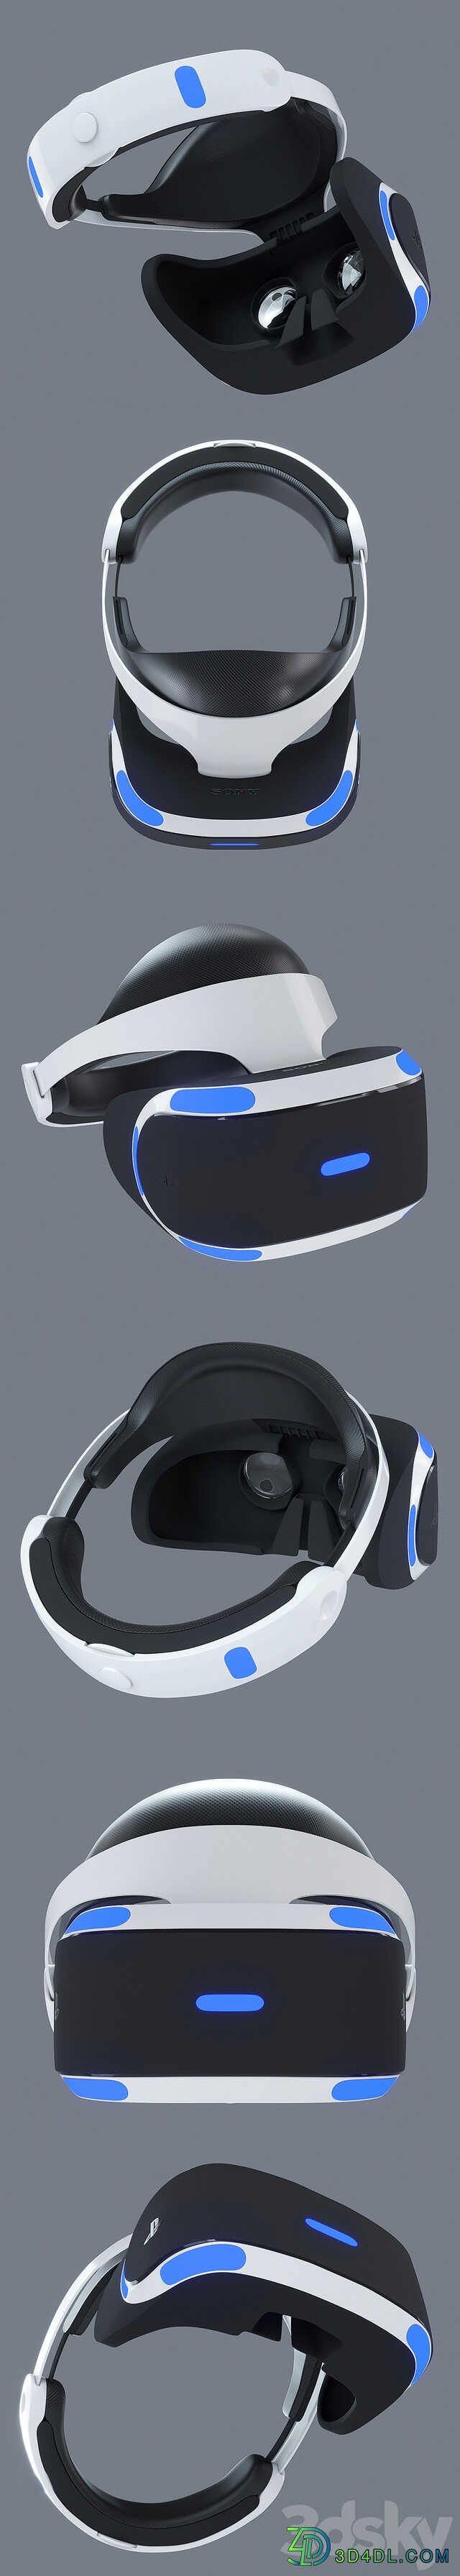 Sony Playstation VR PC other electronics 3D Models